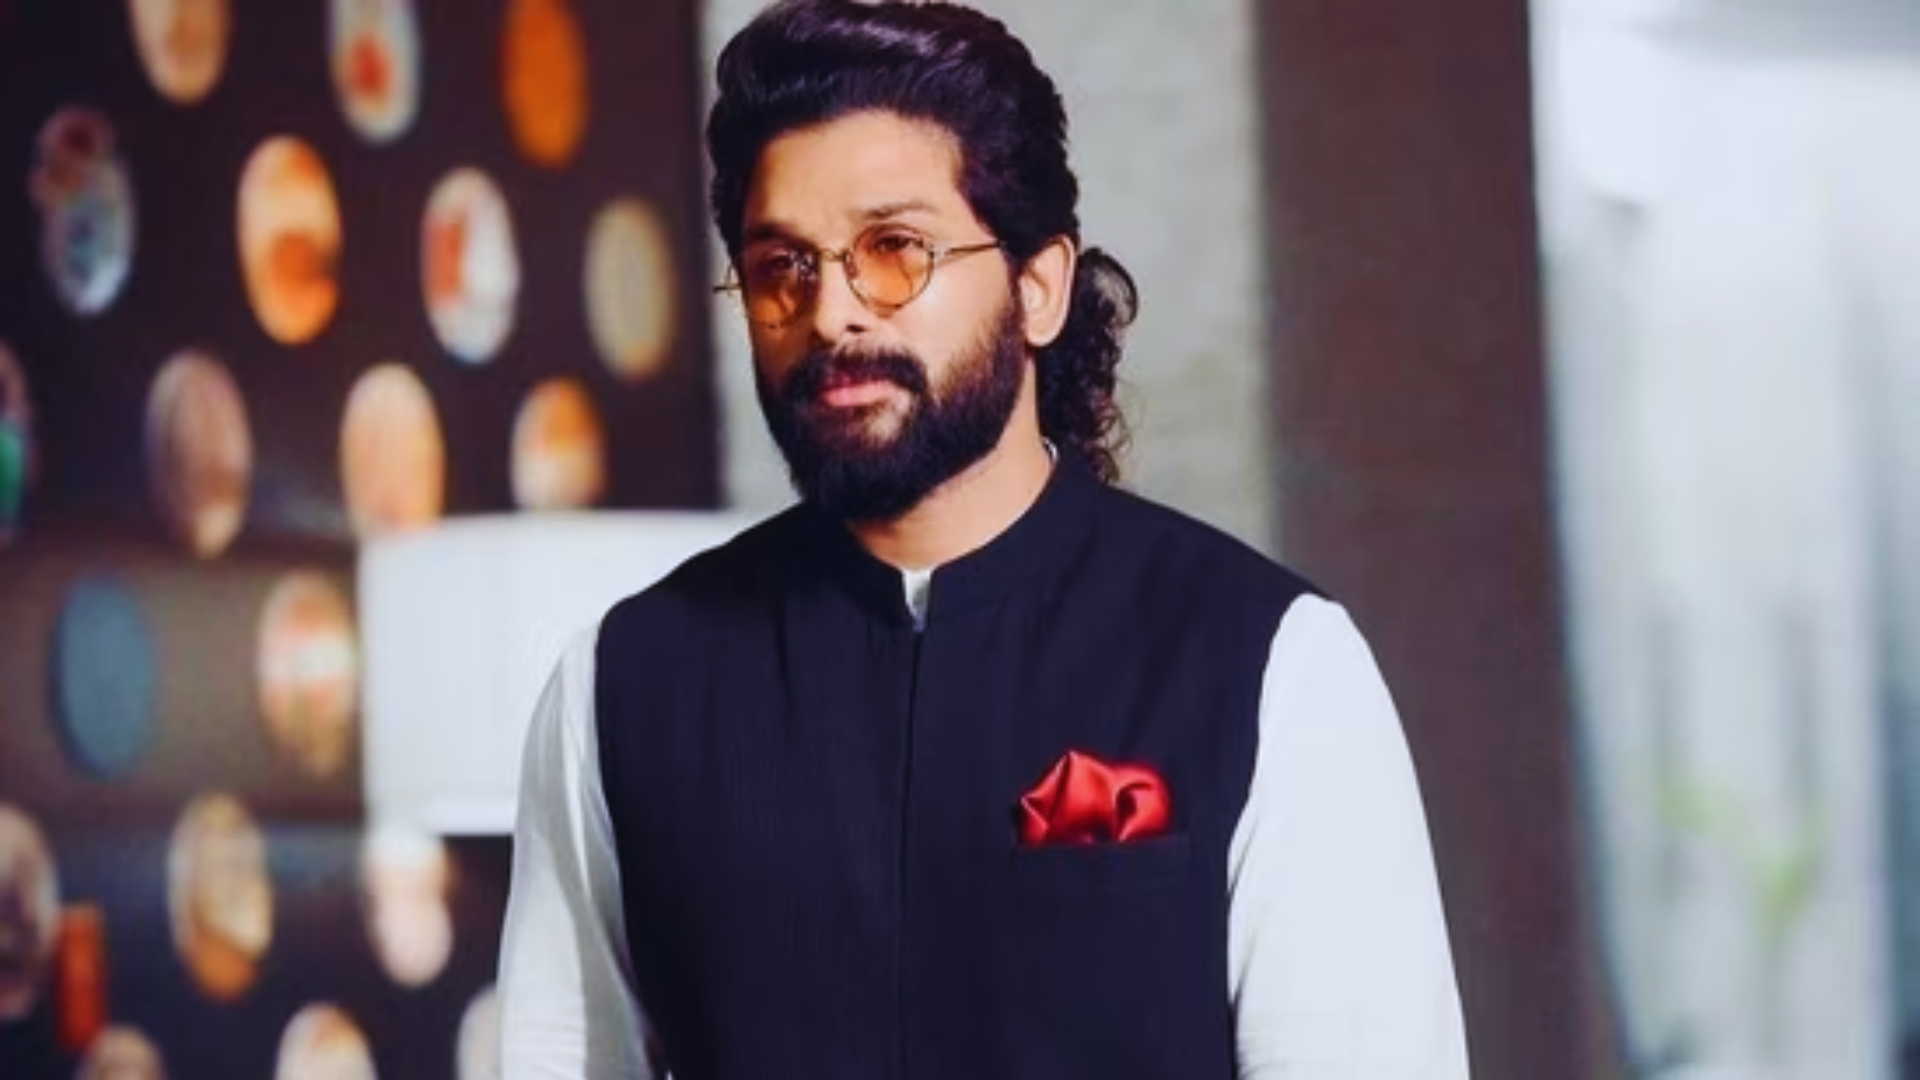 Case Filed Against Allu Arjun For Breaching Poll Code Of Conduct In Andhra Pradesh- Deets Inside!